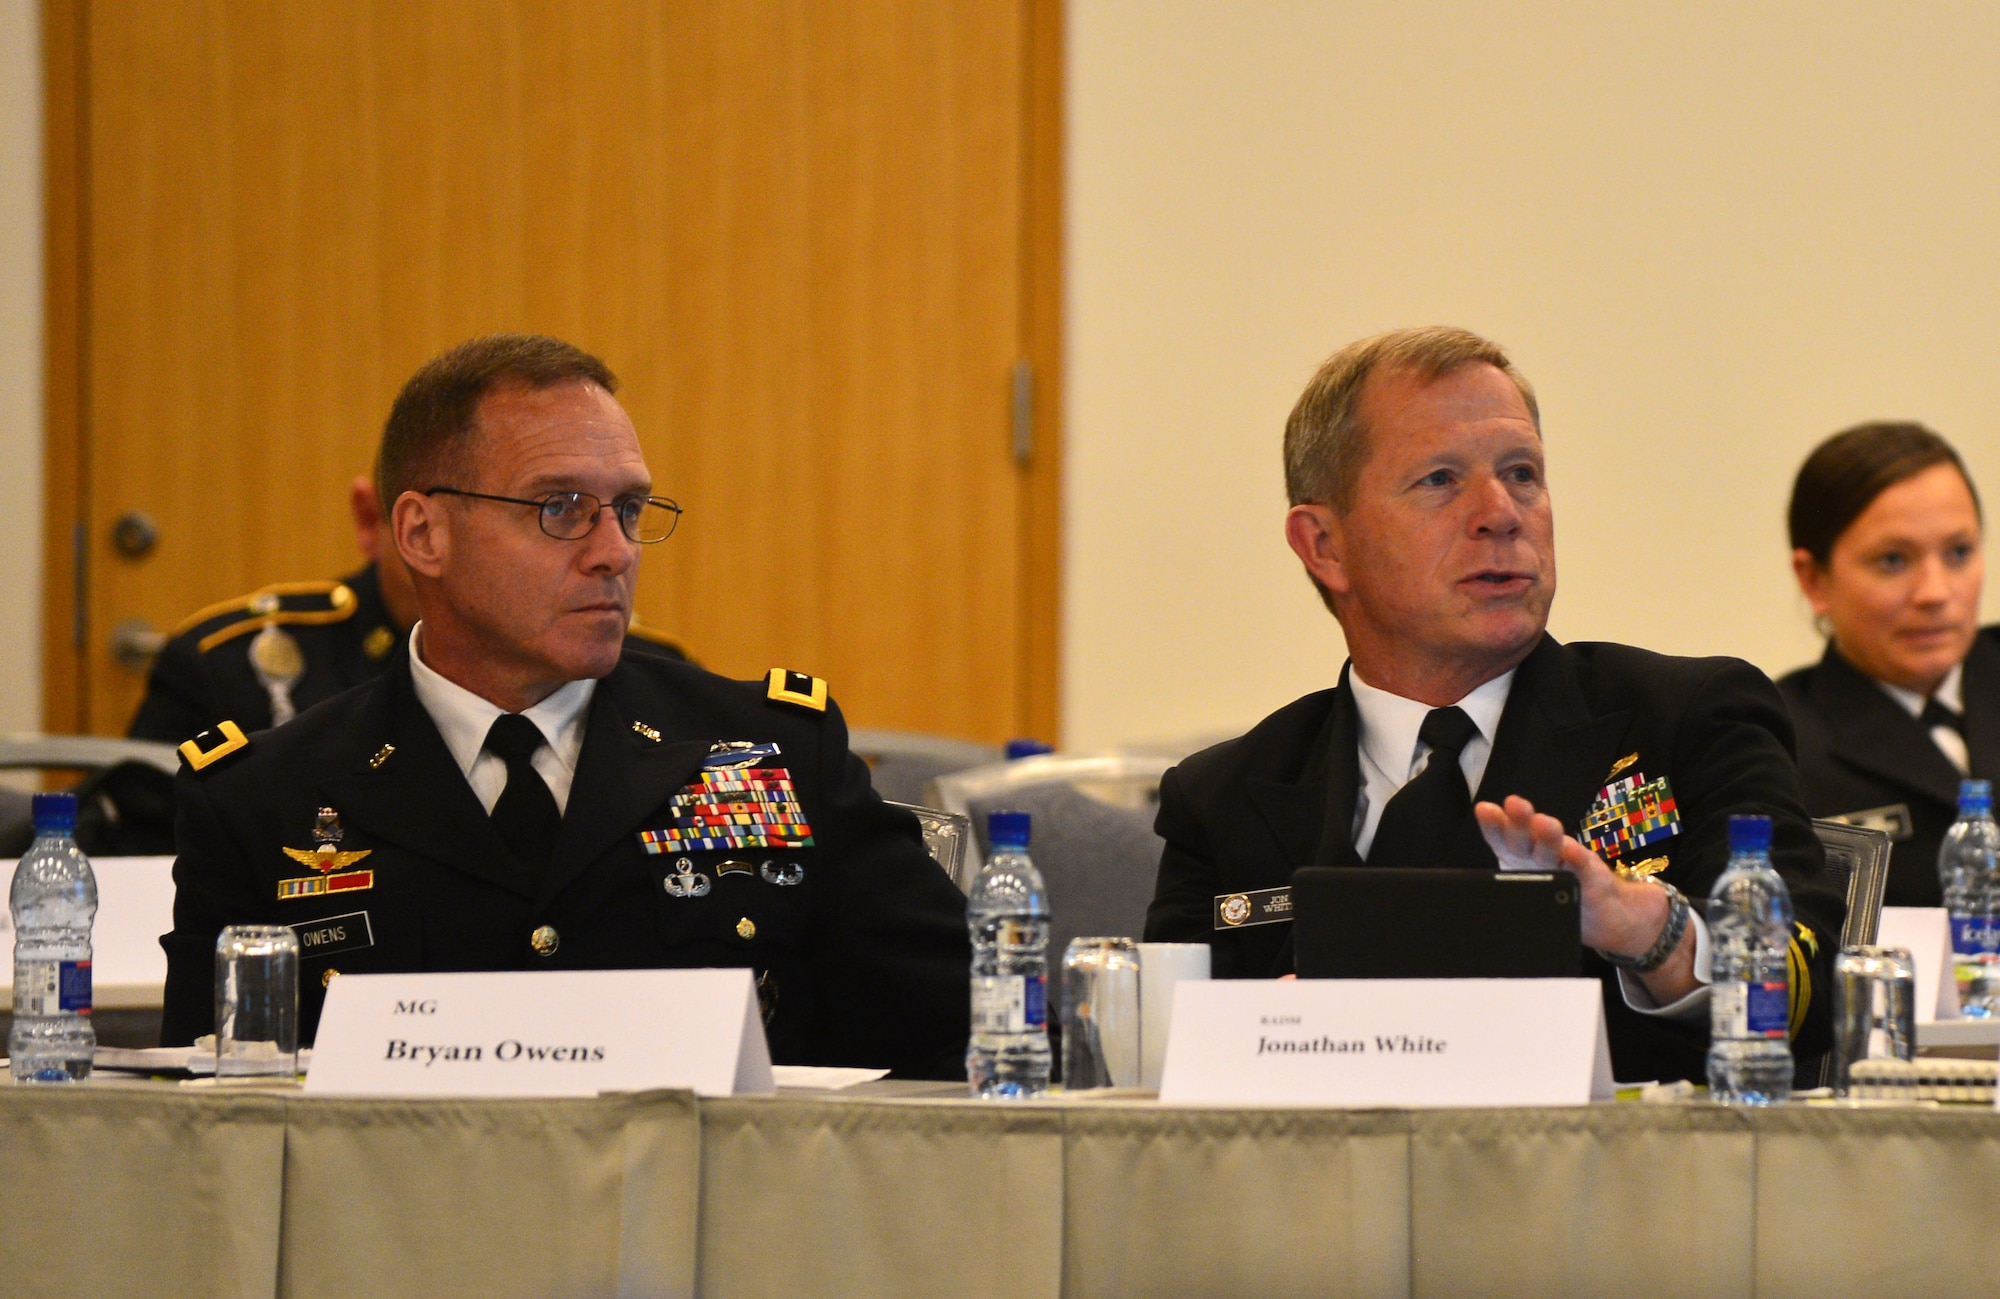 U.S. Navy Rear Adm. Jonathan White asks a question while U.S. Army Major Gen. Bryan Owens looks on during the Arctic Forces Security Roundtable, May 12, 2015 in Reykjavik, Iceland. Representatives from 11 nations across Europe and North America met for the ASFR in order to promote regional understanding and enhance multilateral security operations within the Arctic area. The United States co-led the talks alongside Norway. (U.S. Air Force photo by 2nd Lt. Meredith Mulvihill/Released)